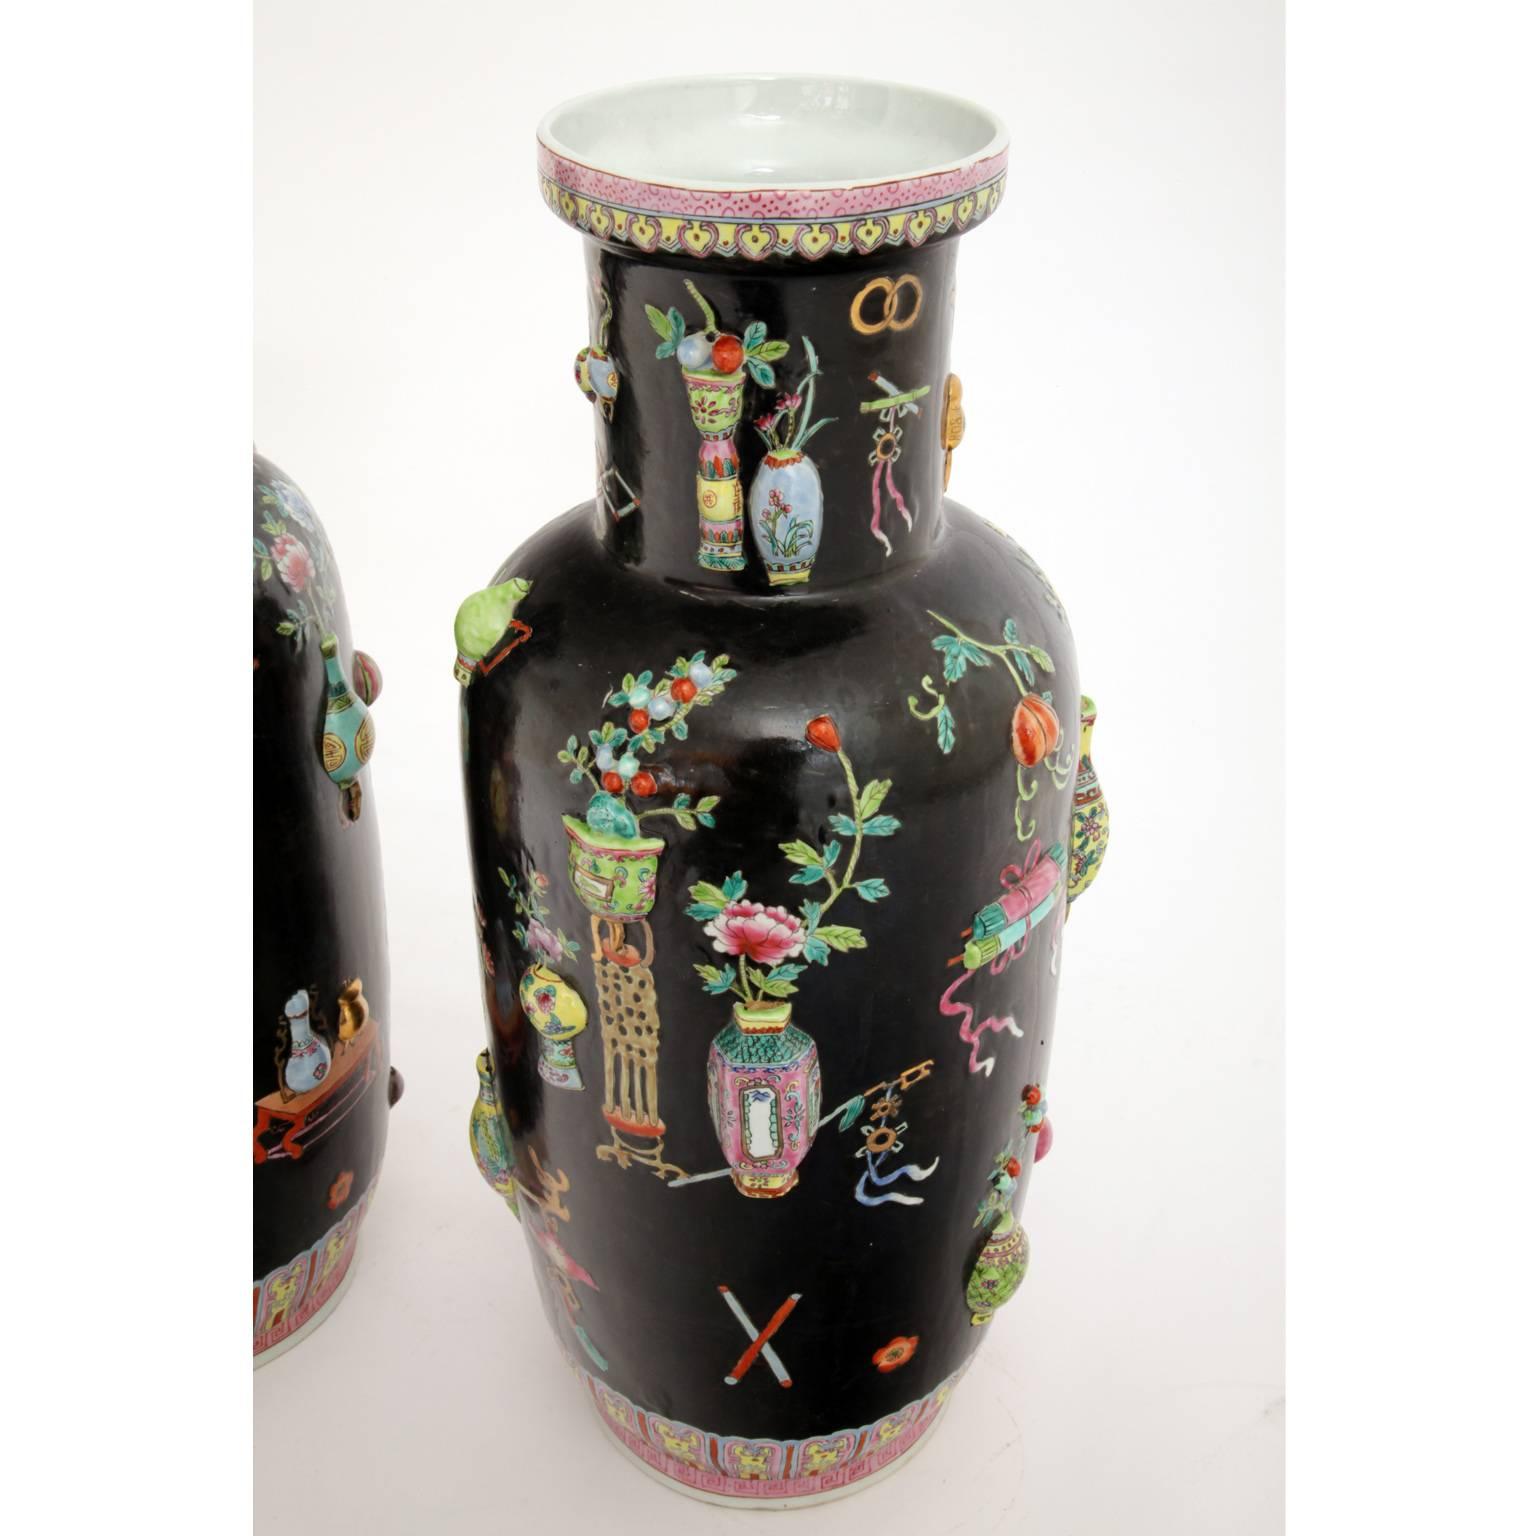 Pair of black Chinese porcelain vases with polychrome pictures of flowers and vases as well as good luck charms and symbols of eternity. Some of the depicted vases are three dimensional which gives the vases a very interesting and joyful look. There